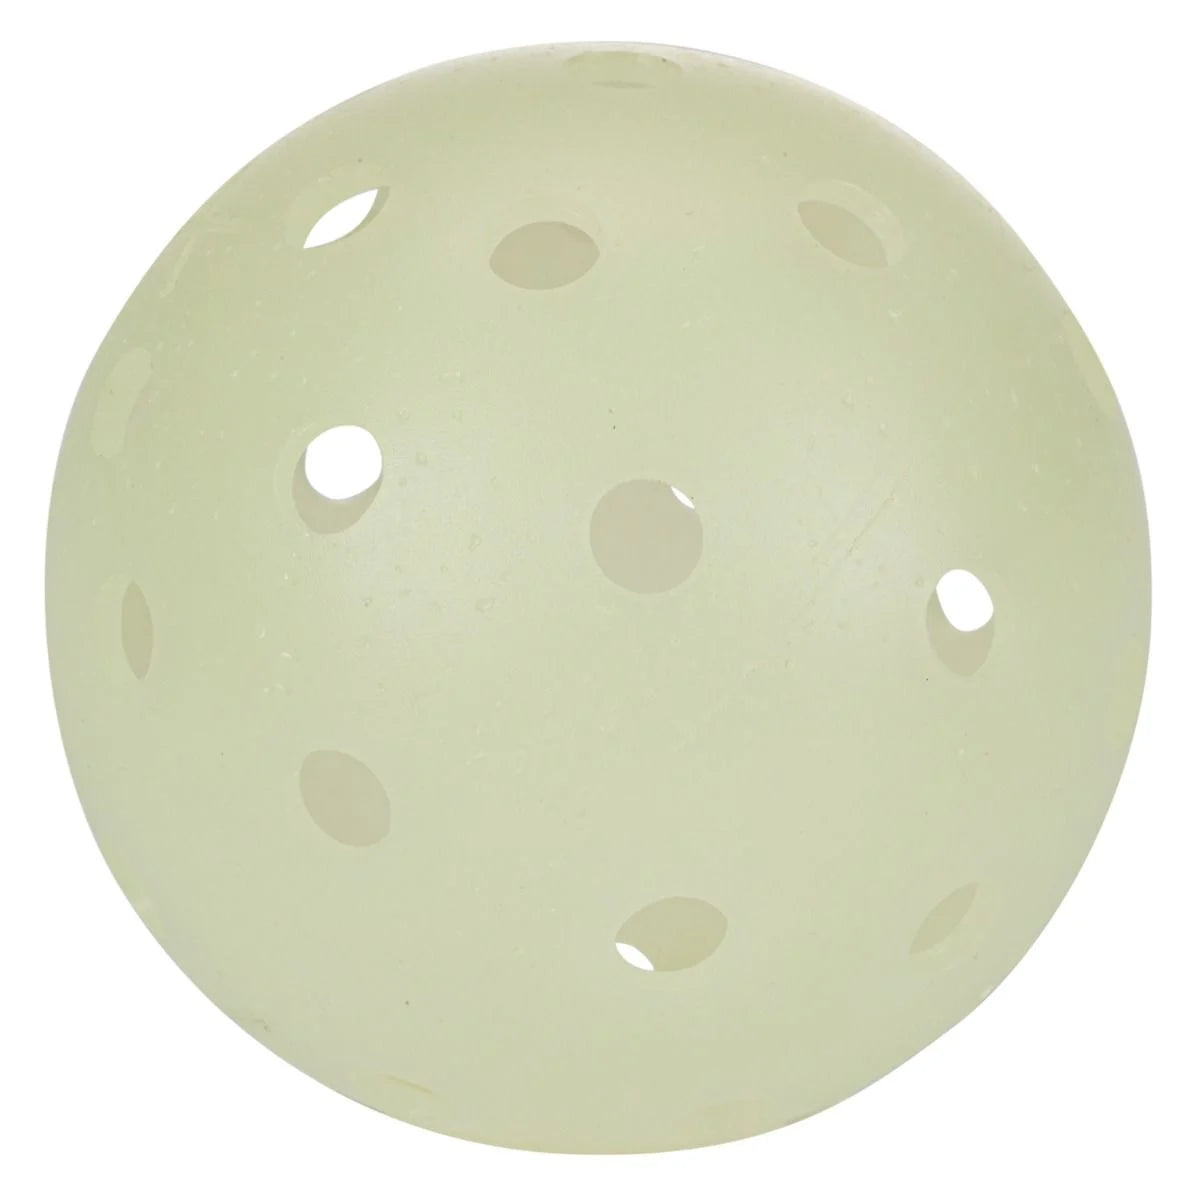 A Franklin X-40 Glow-In-The-Dark Pickleball Ball, perfect for a pickleball game.